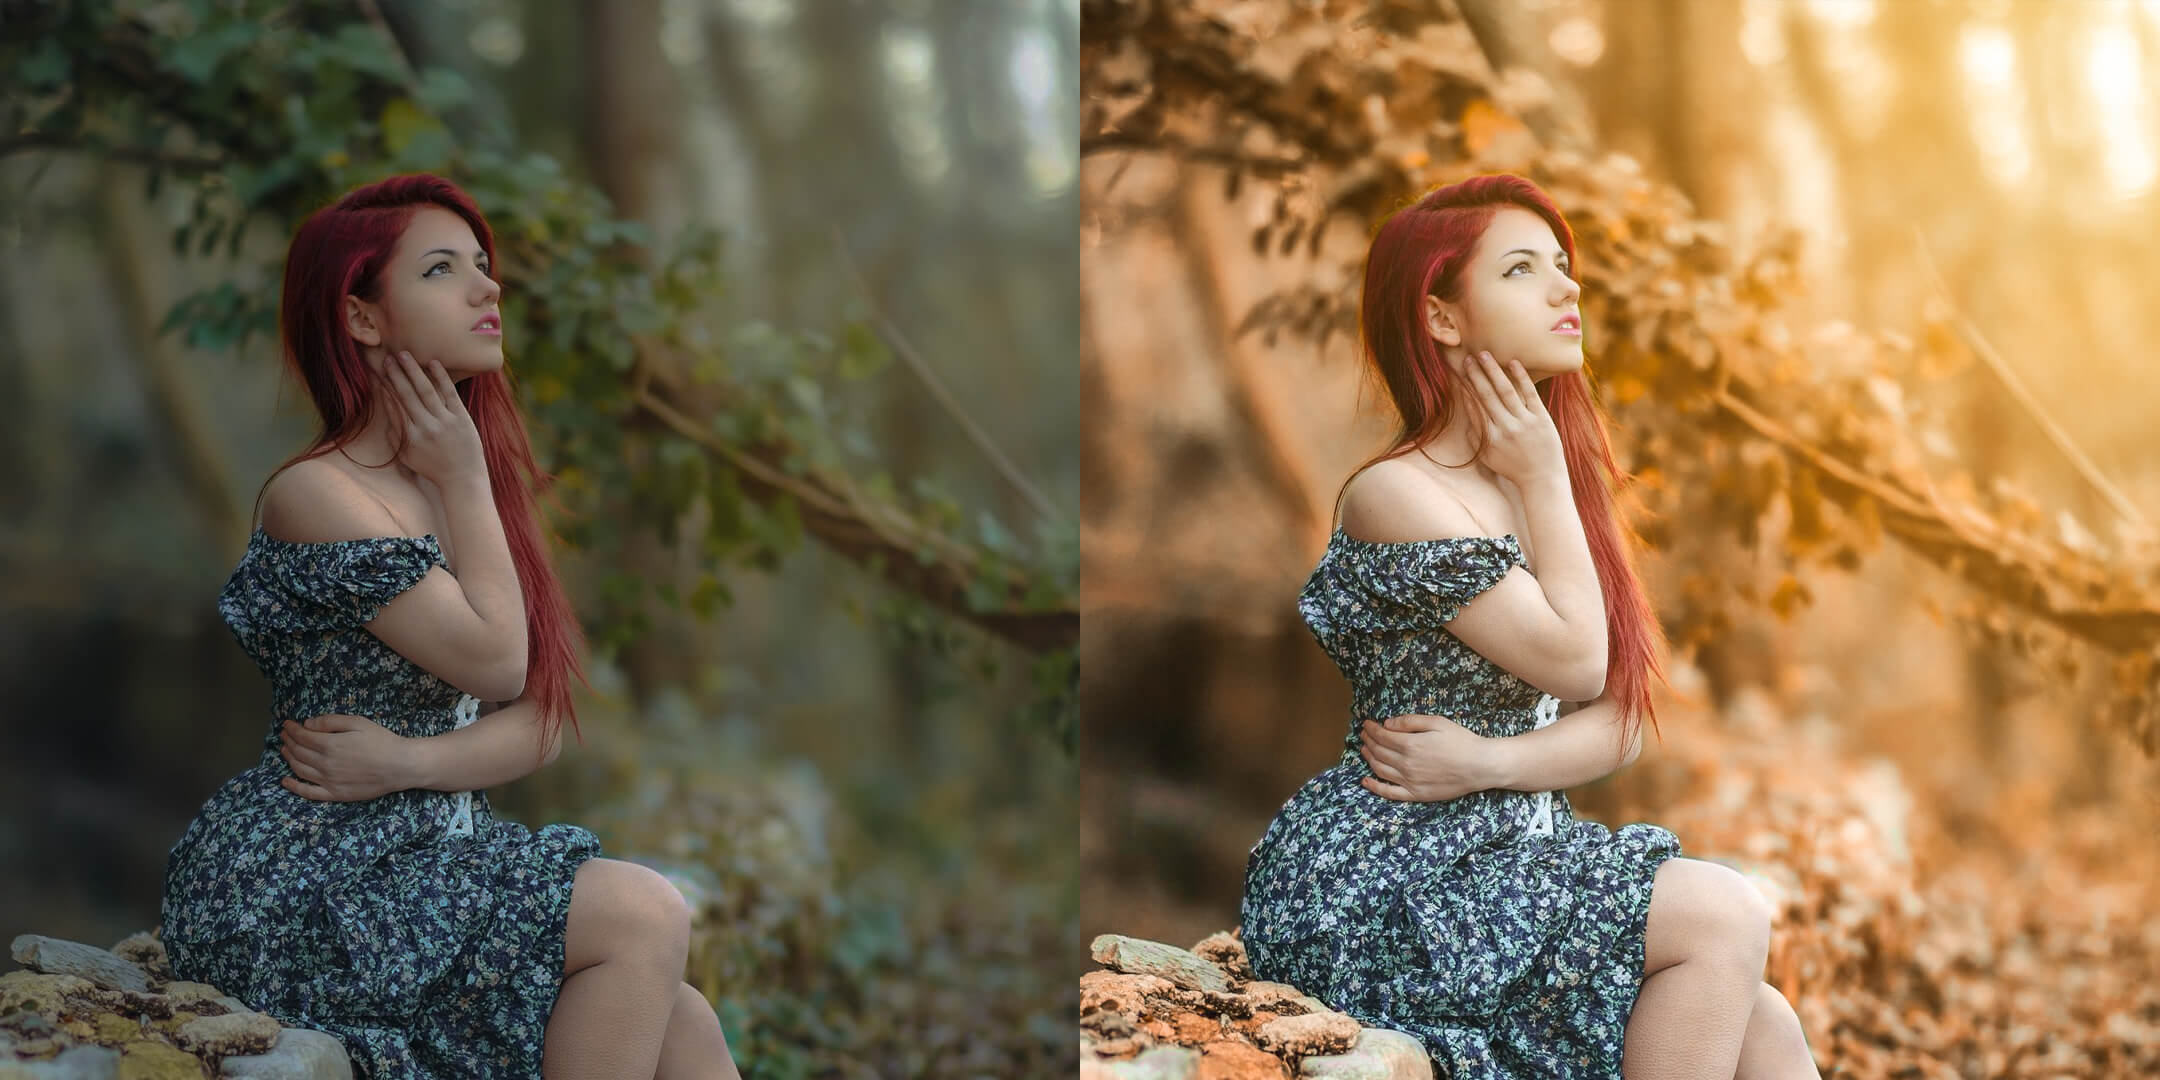 image retouching services